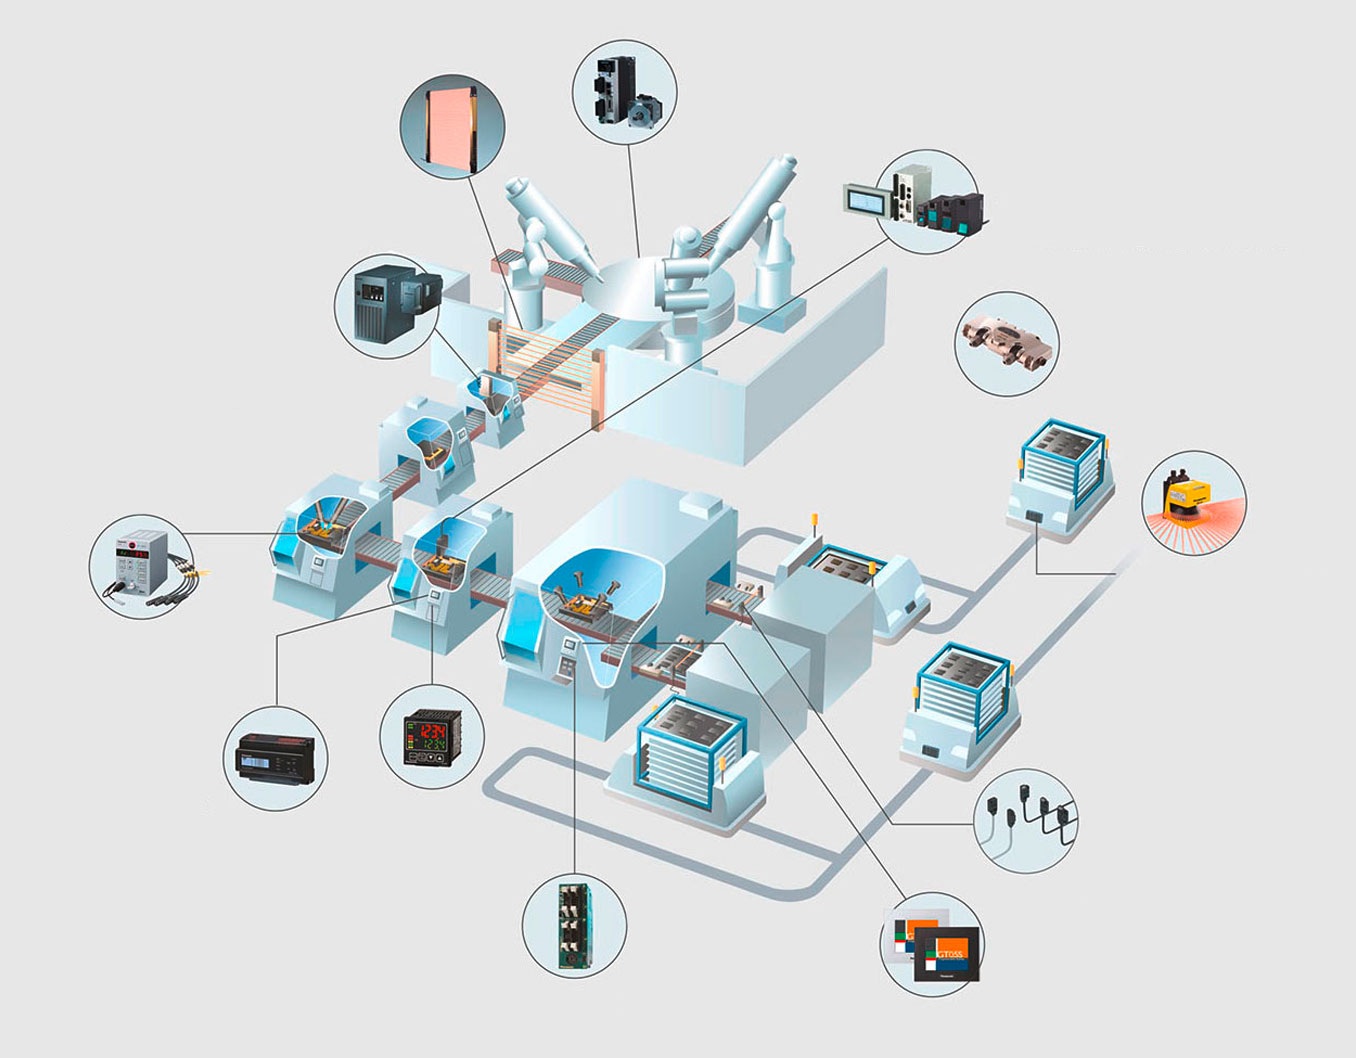 Products and solutions for the modern, smart manufacturing industry